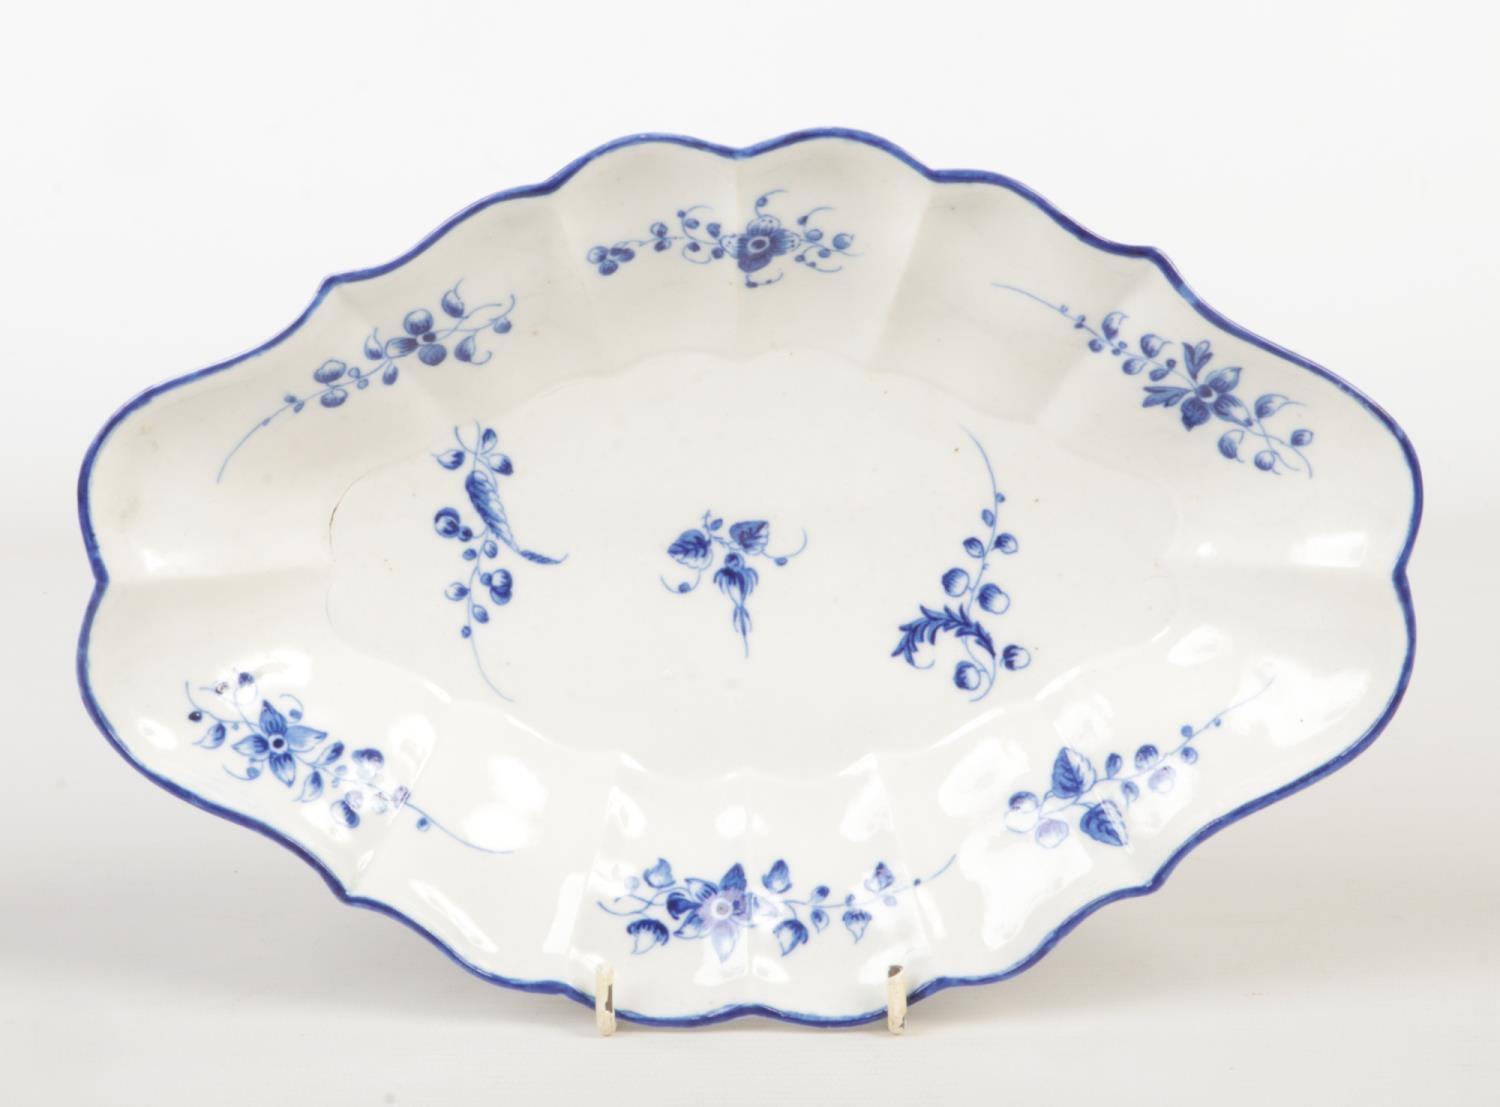 A Caughley scalloped dessert dish. Painted in underglaze blue with scattered sprigs under a blue